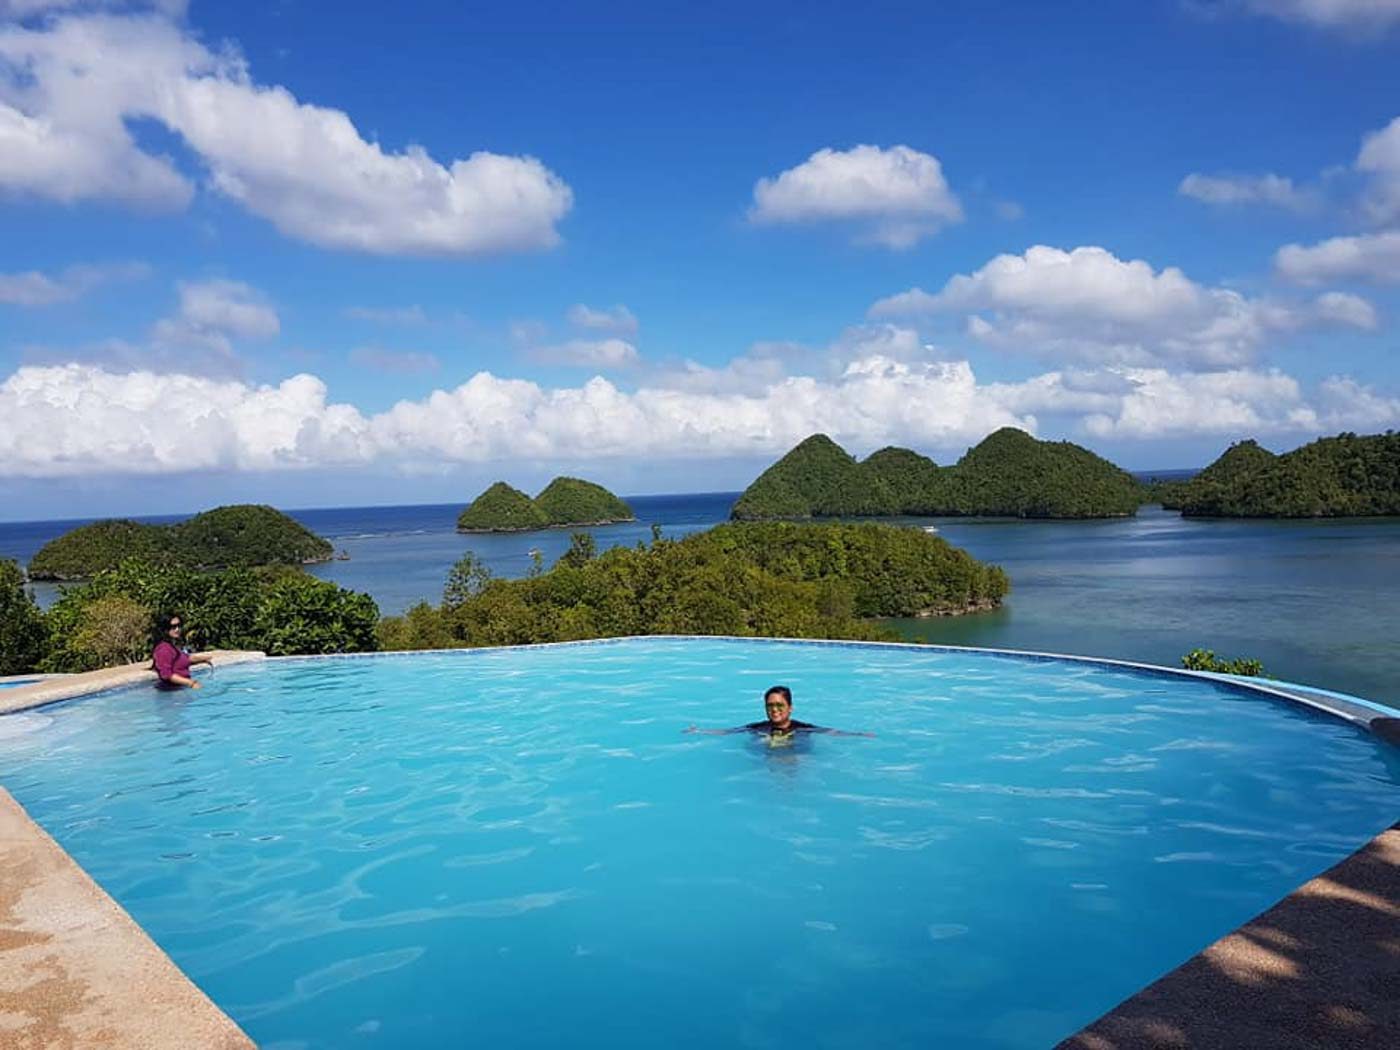 POOL VIEW. The islets can also be enjoyed from a private resort. Photo by Alberto Gadia 